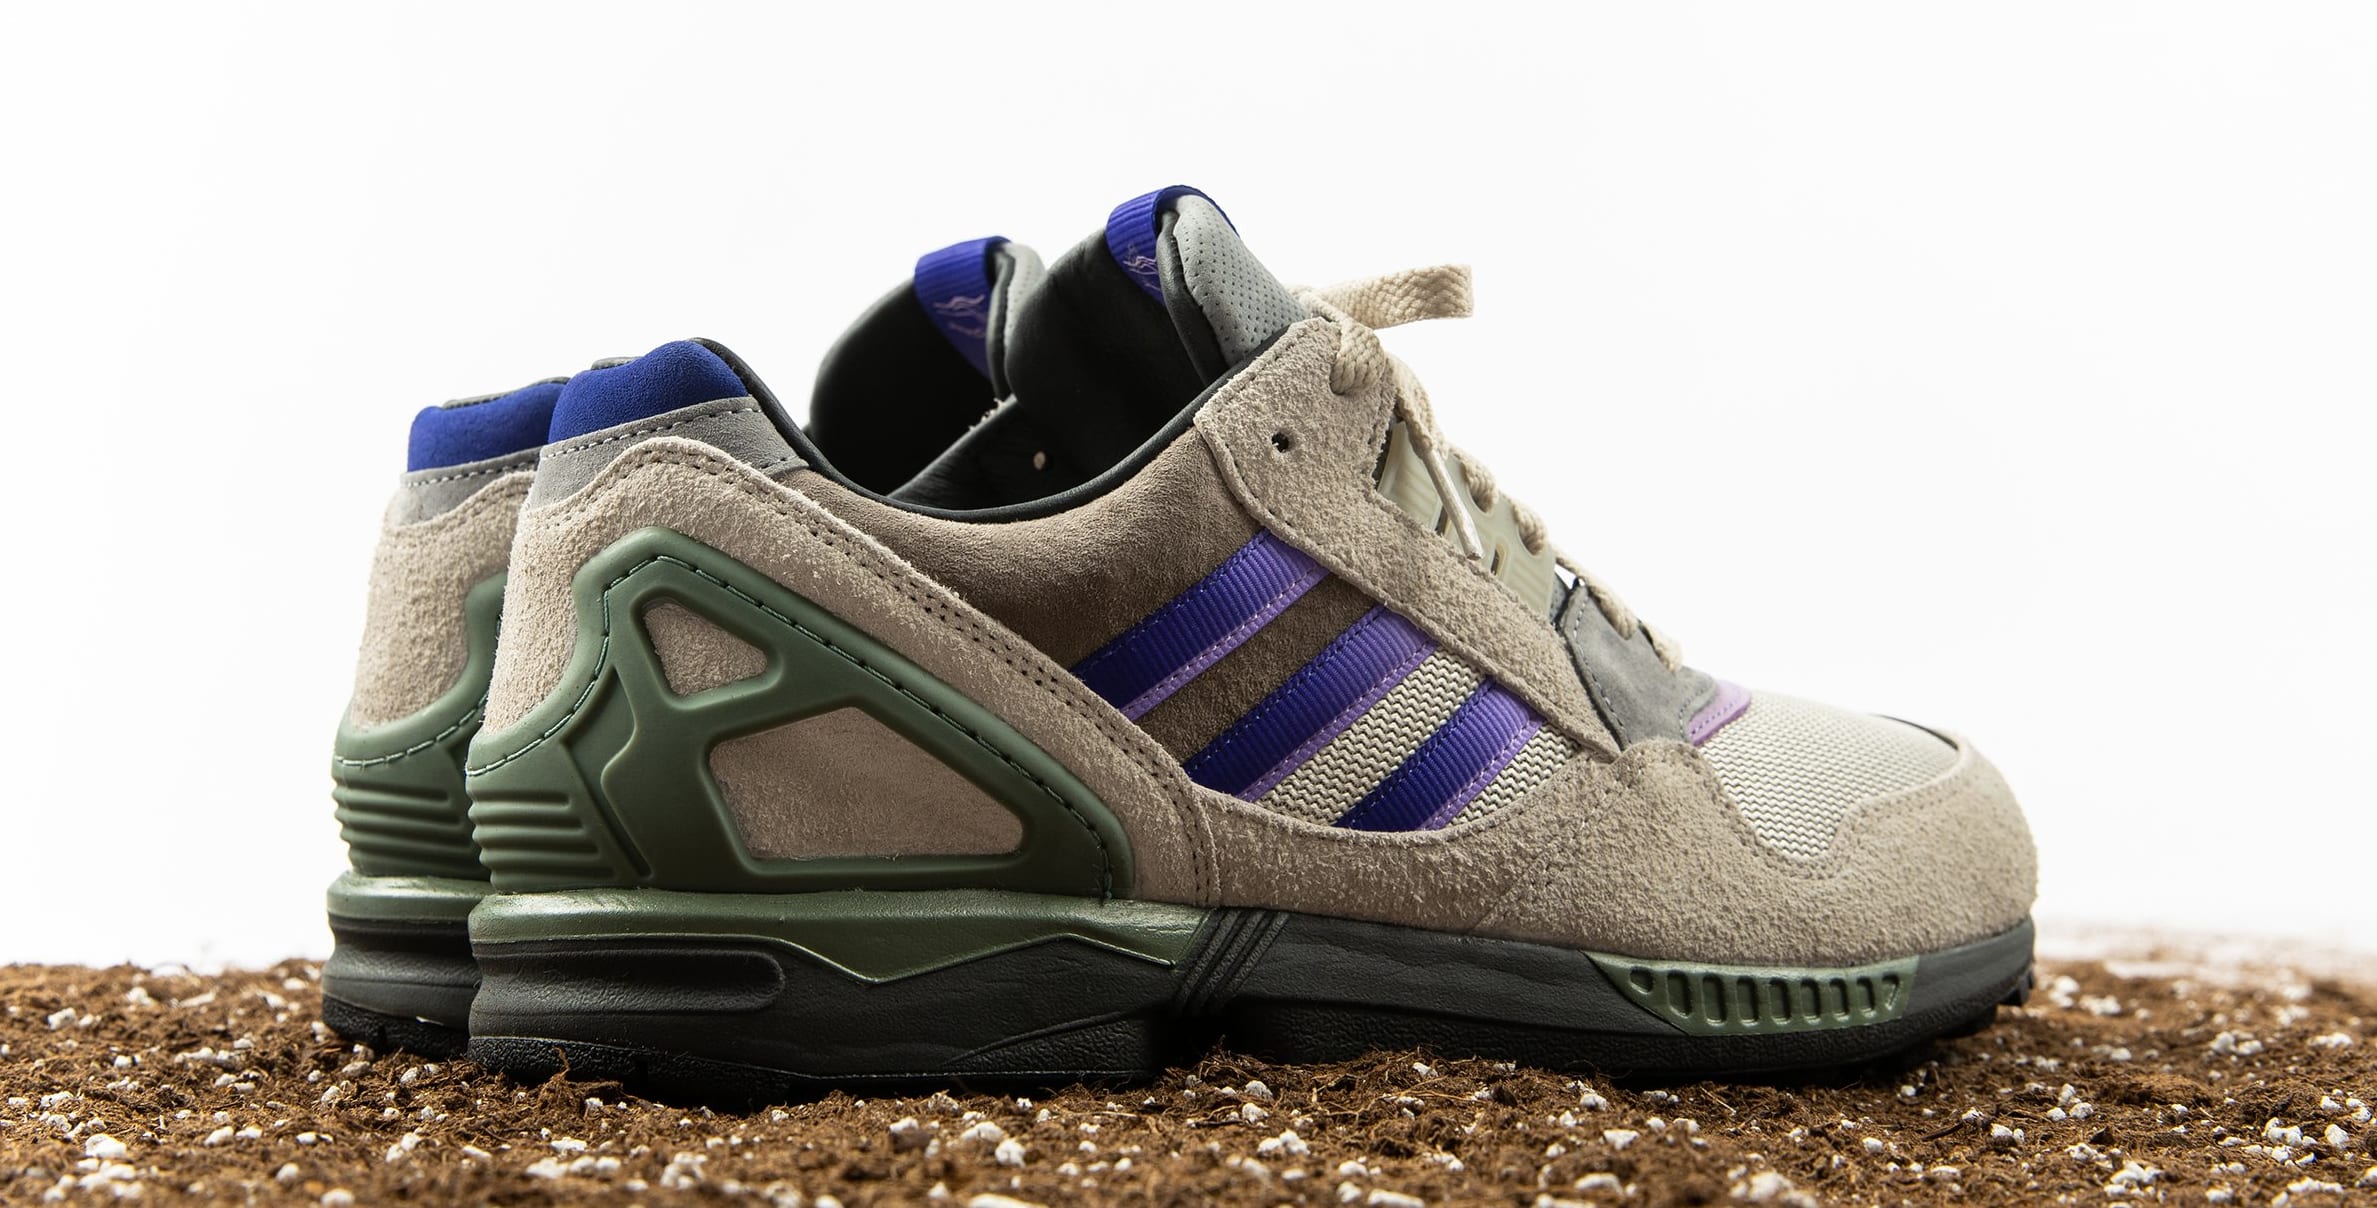 packer-shoes-adidas-consortium-zx-9000-meadow-violet-lateral